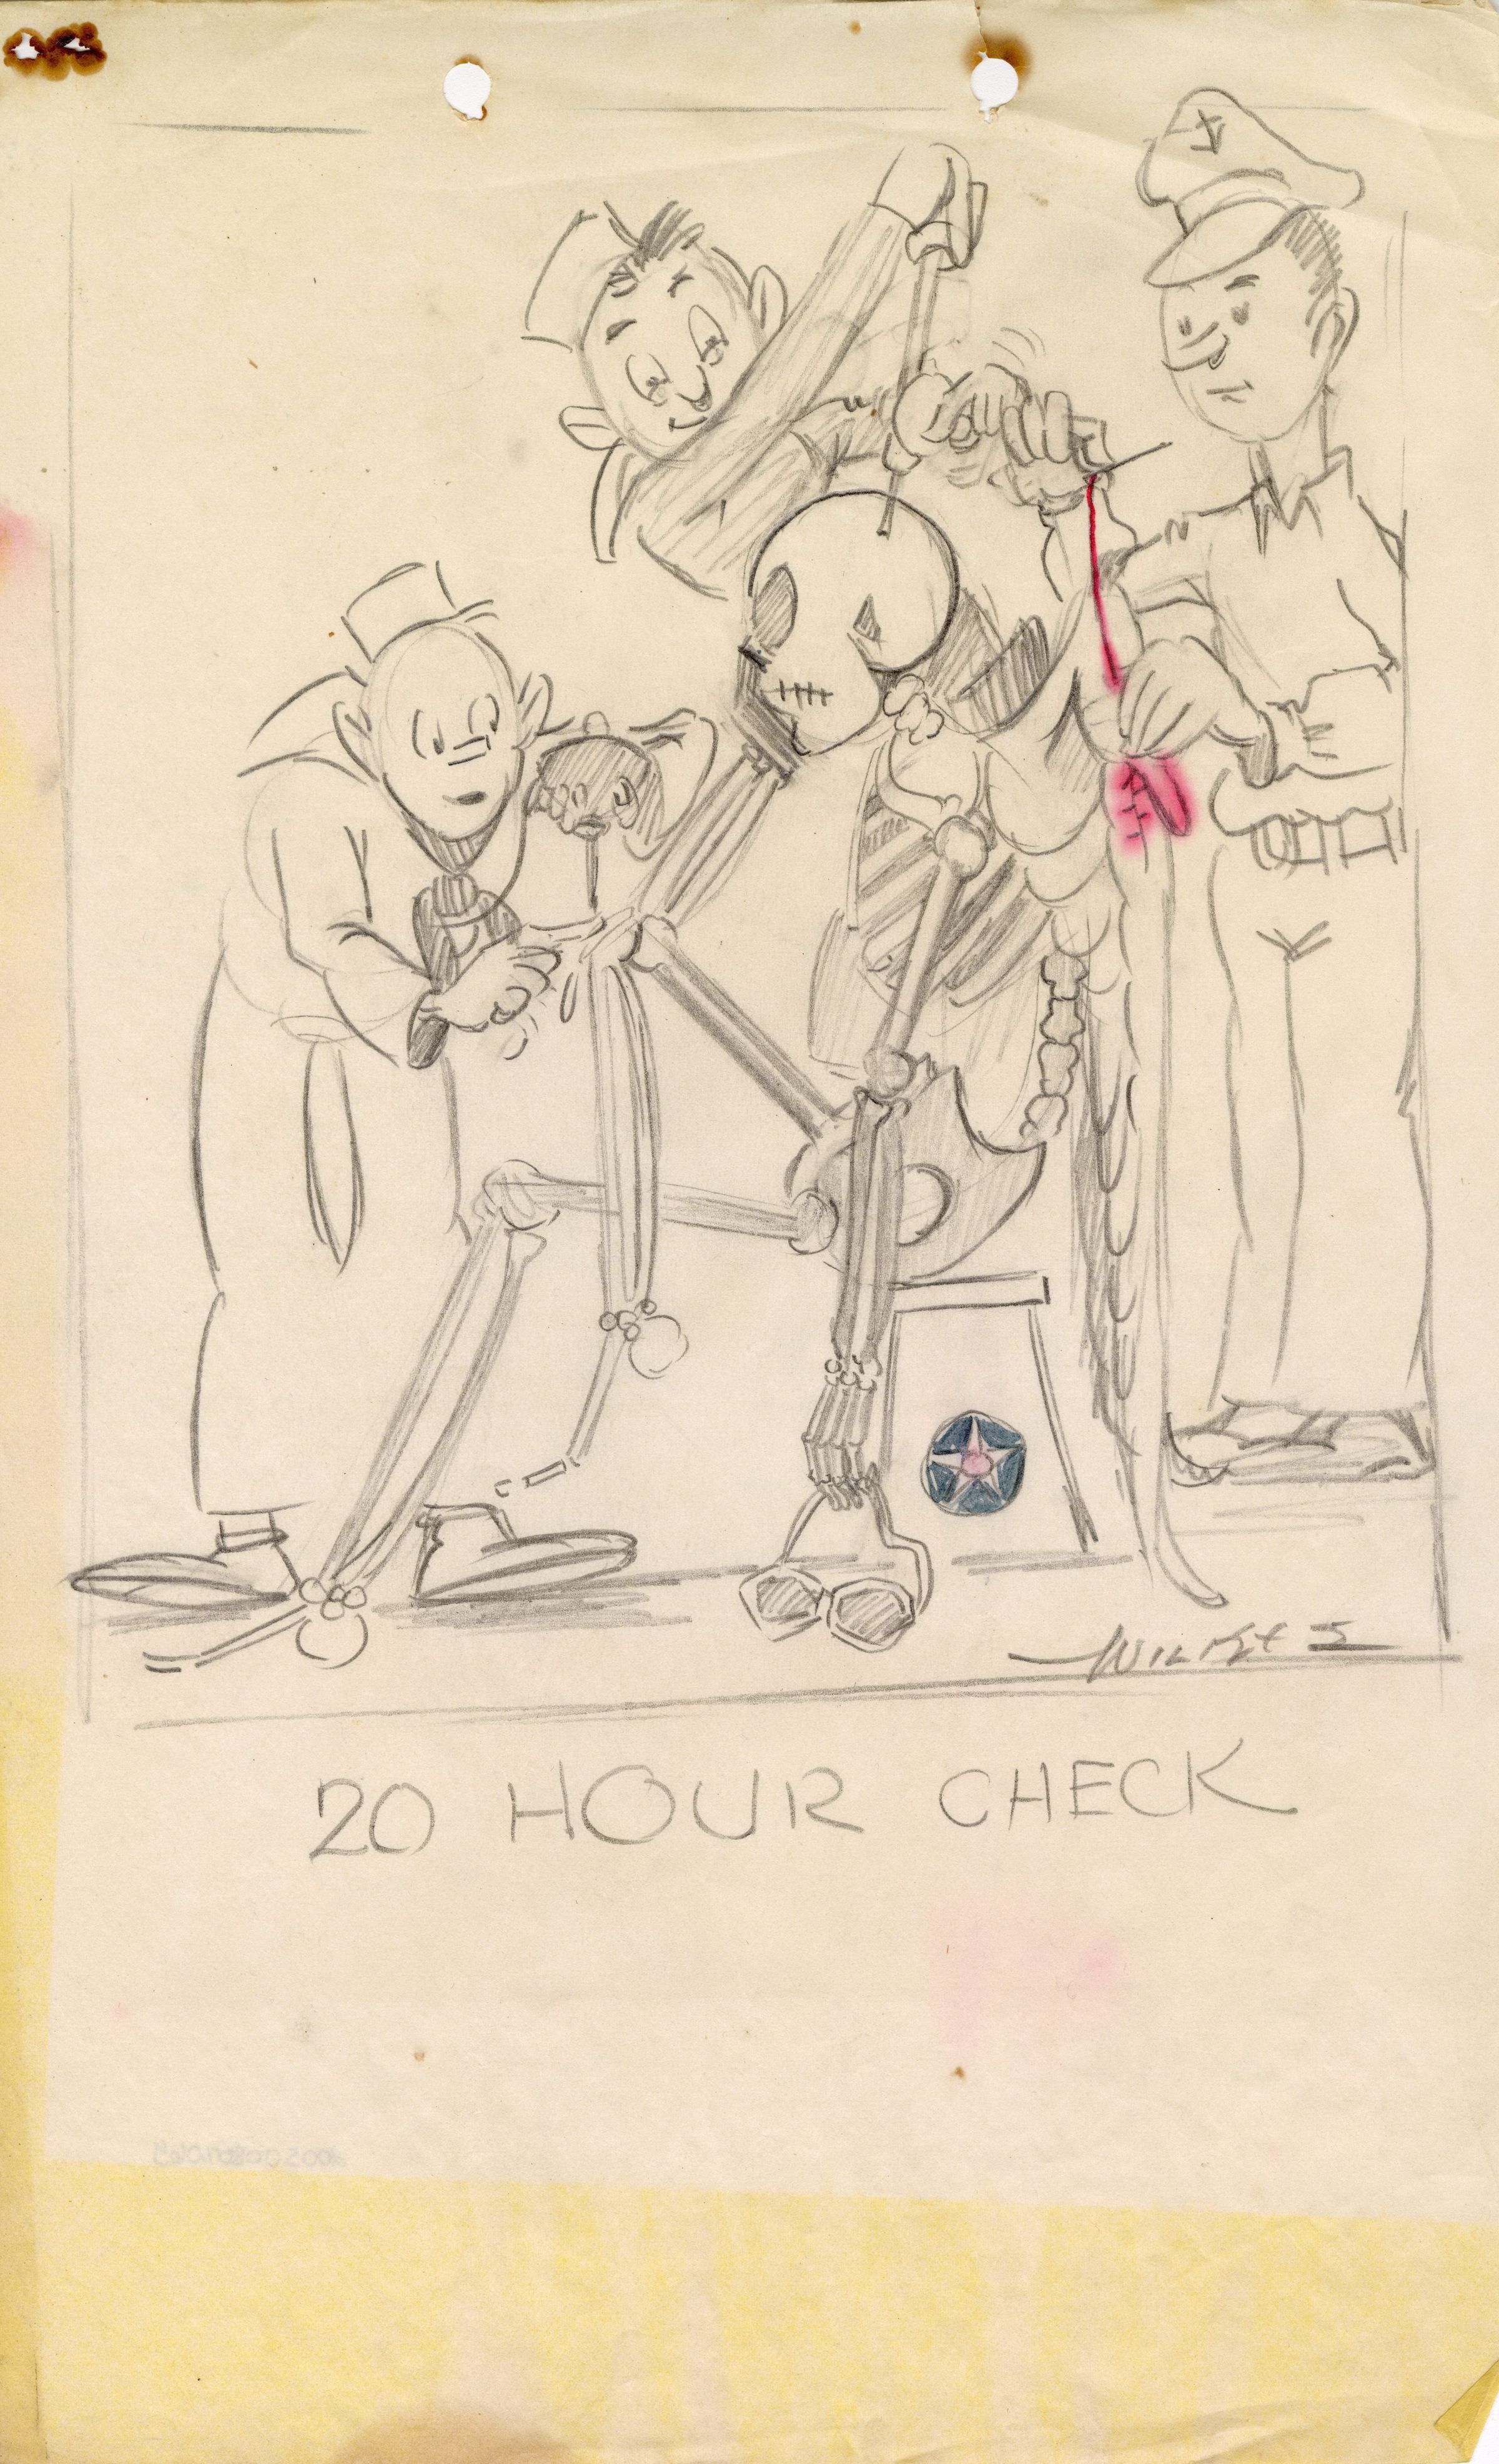 Primary Image of Grim Reapers' '20 Hour Check'